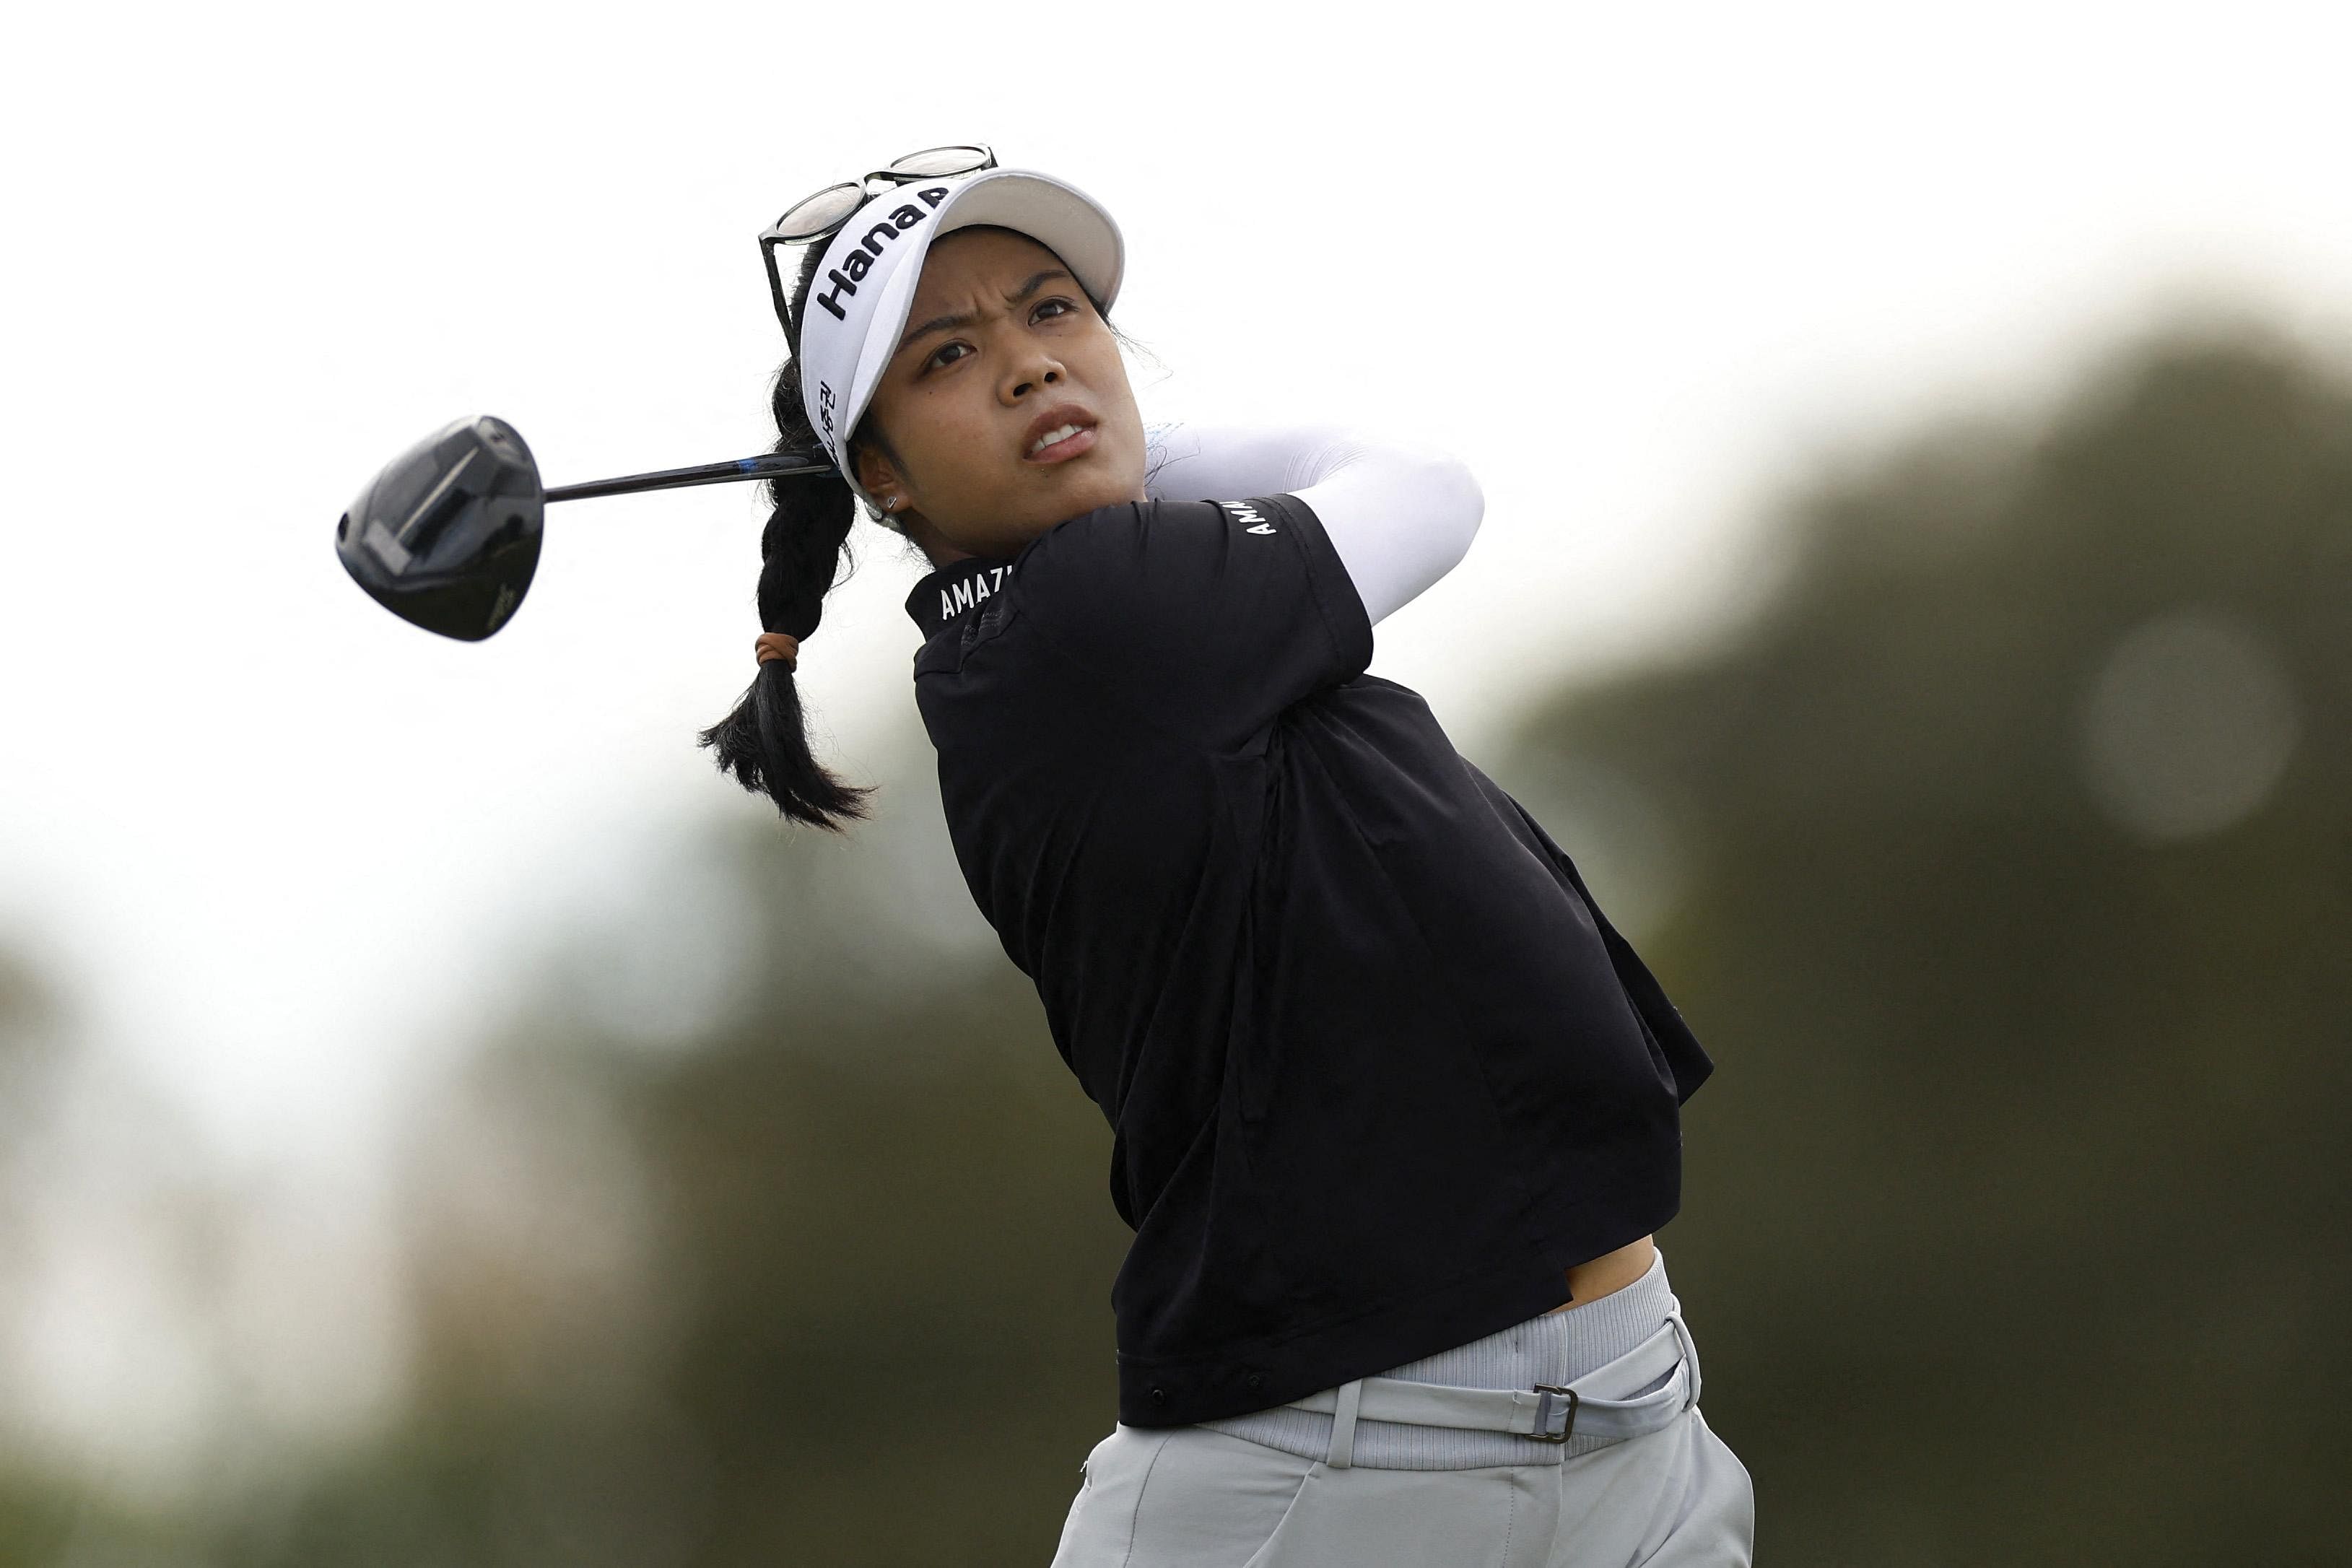 Just a girl who loves golf, Patty Tavatanakit to play at the Singapore Women’s Open